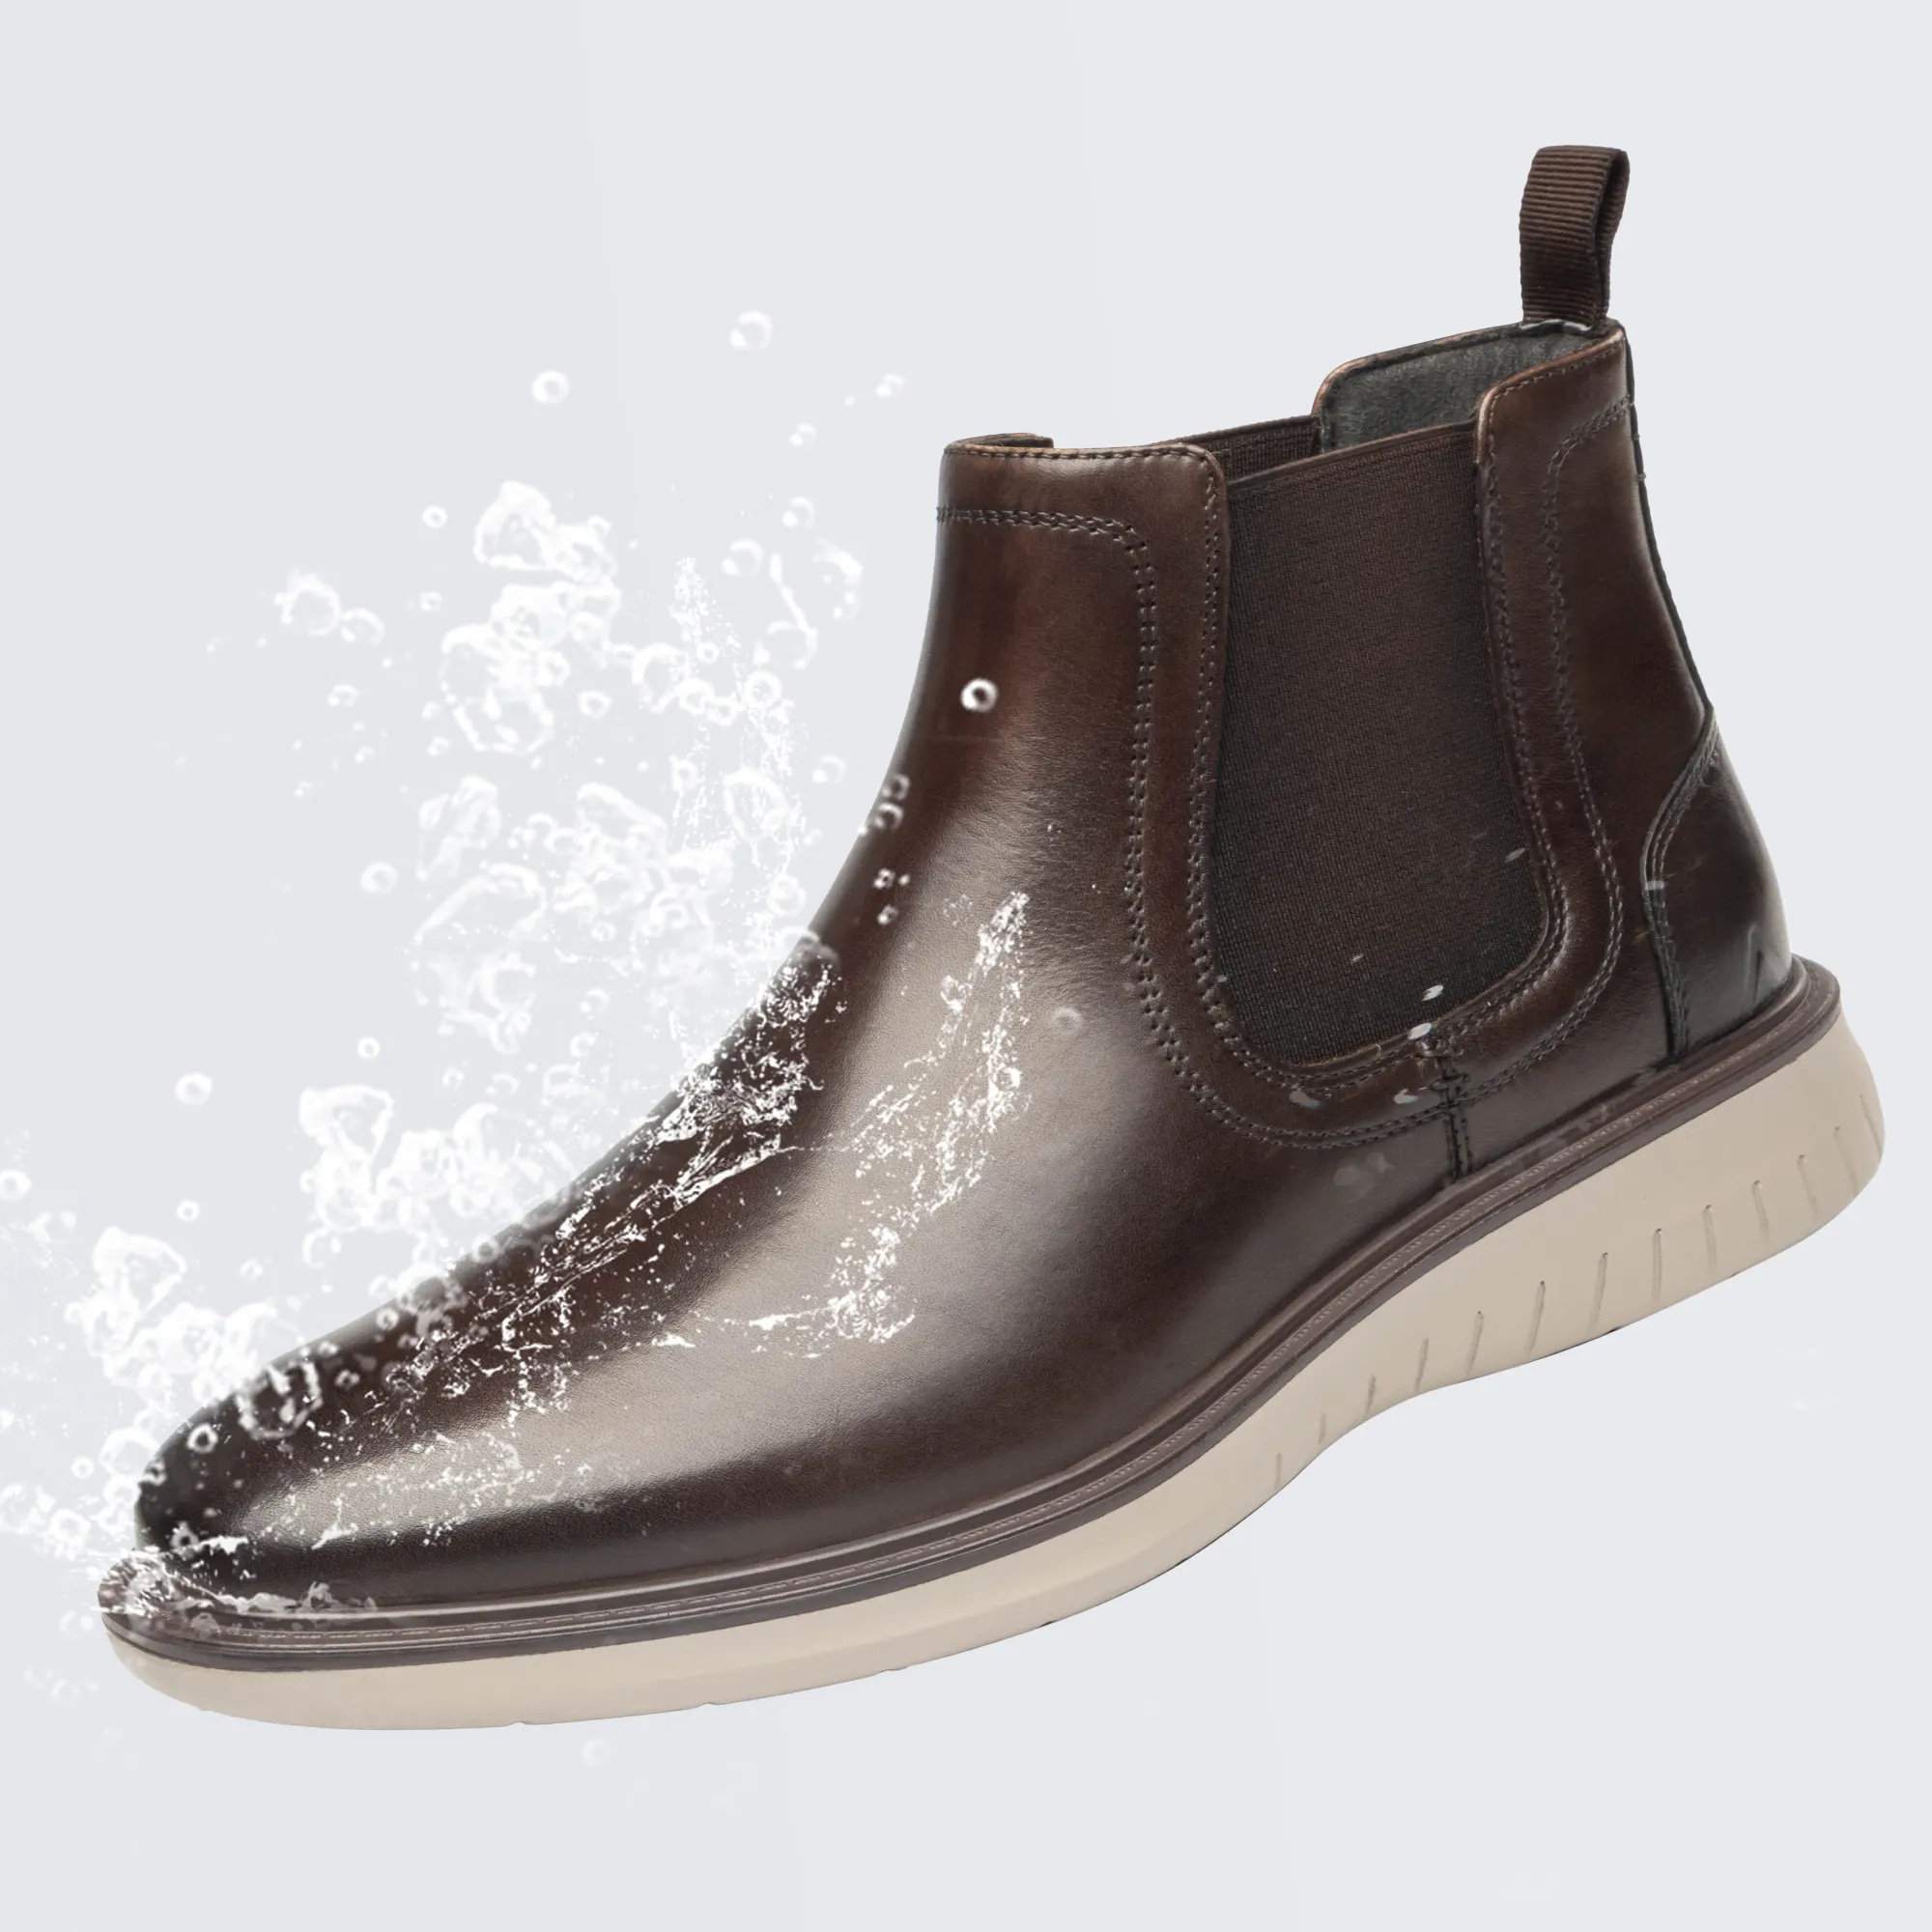 Water Proof Slip On Genuine Leather Chelsea Dress Boots Man Shoe